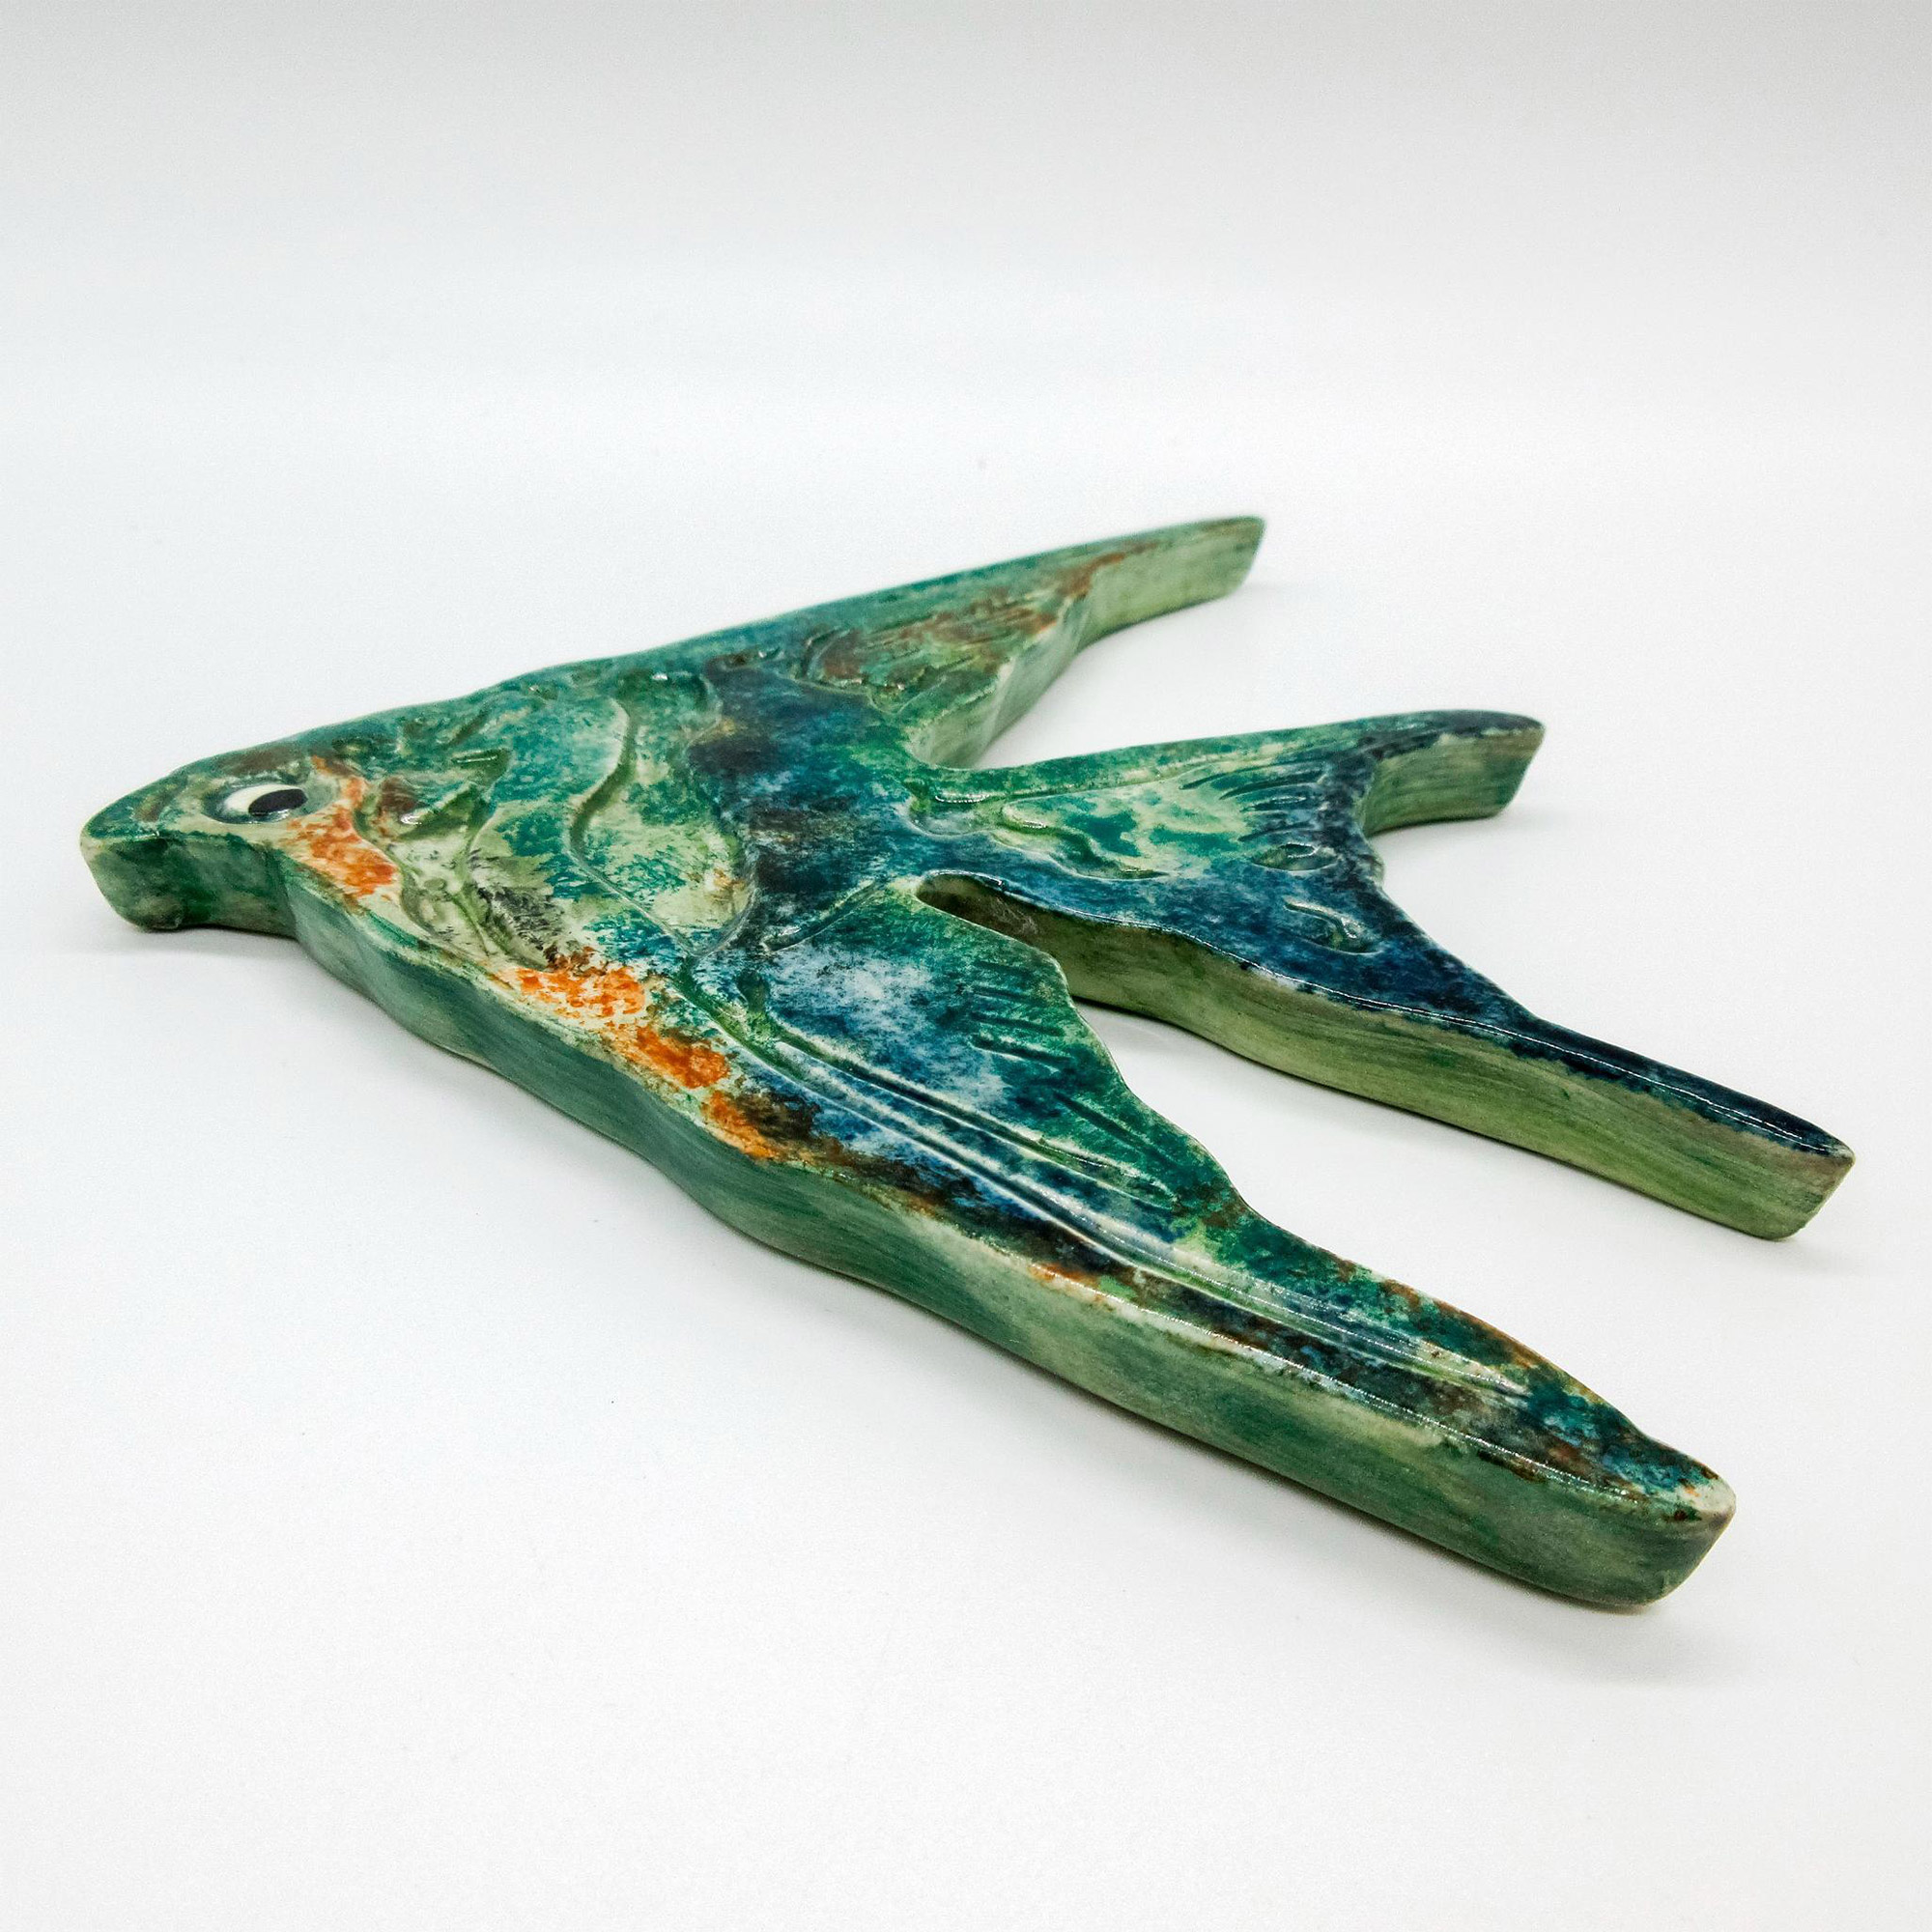 Goldscheider Pottery Plaque, Tropical Fish - Image 2 of 4